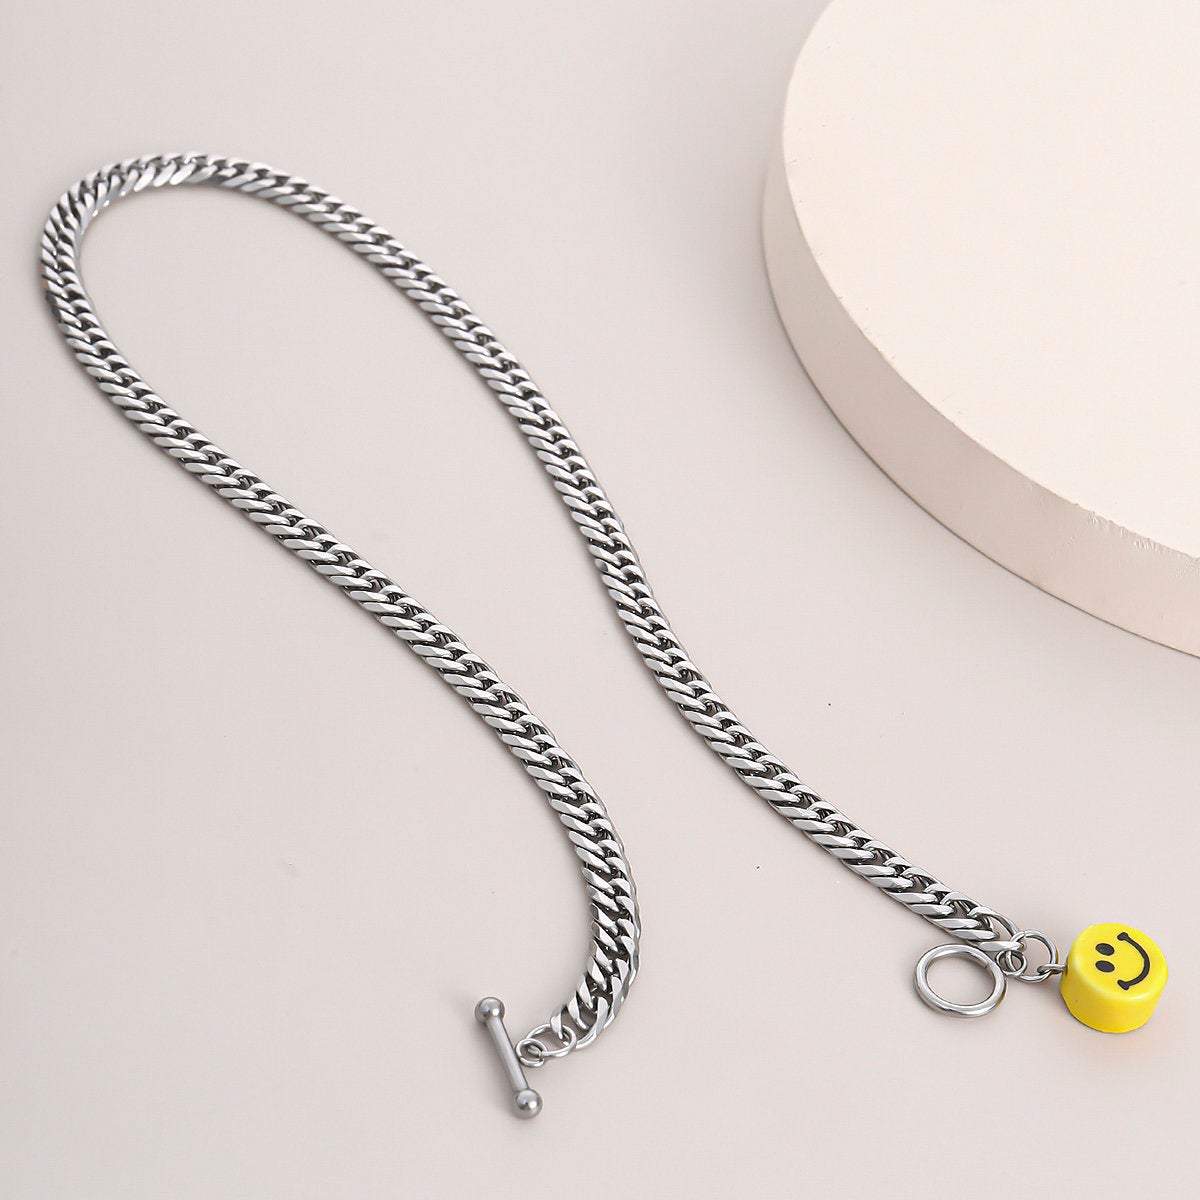 Stainless Steel Smile Face Toggle Clasp Curb Link Chain Necklace